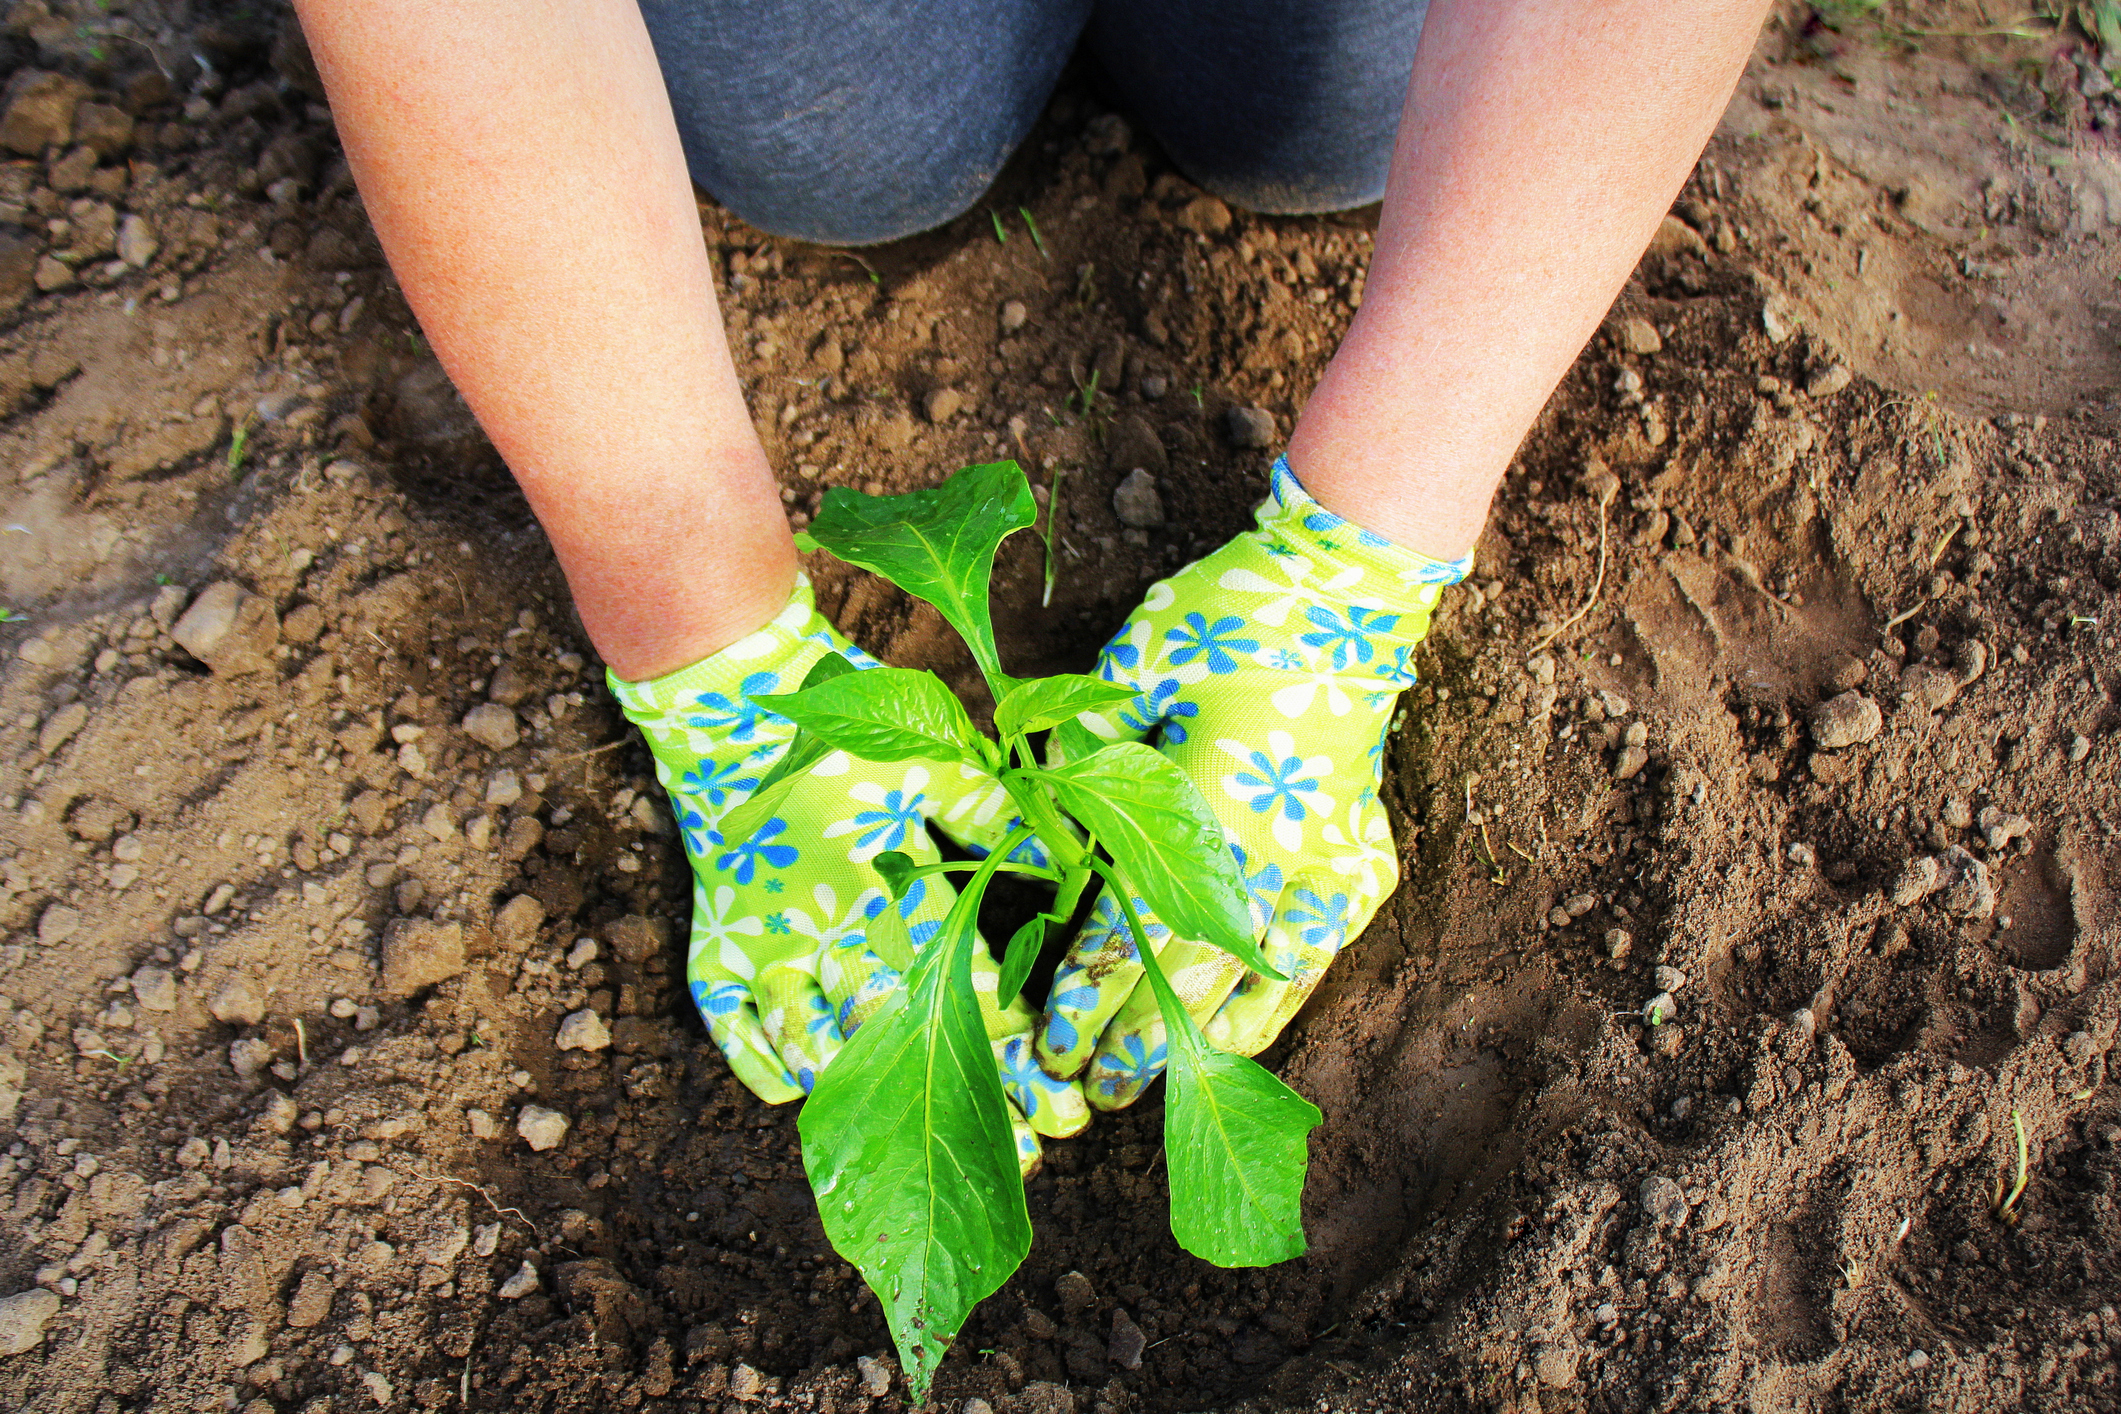 Women's hands planting a young plant of pepper in the ground. Planting paprika seedlings.